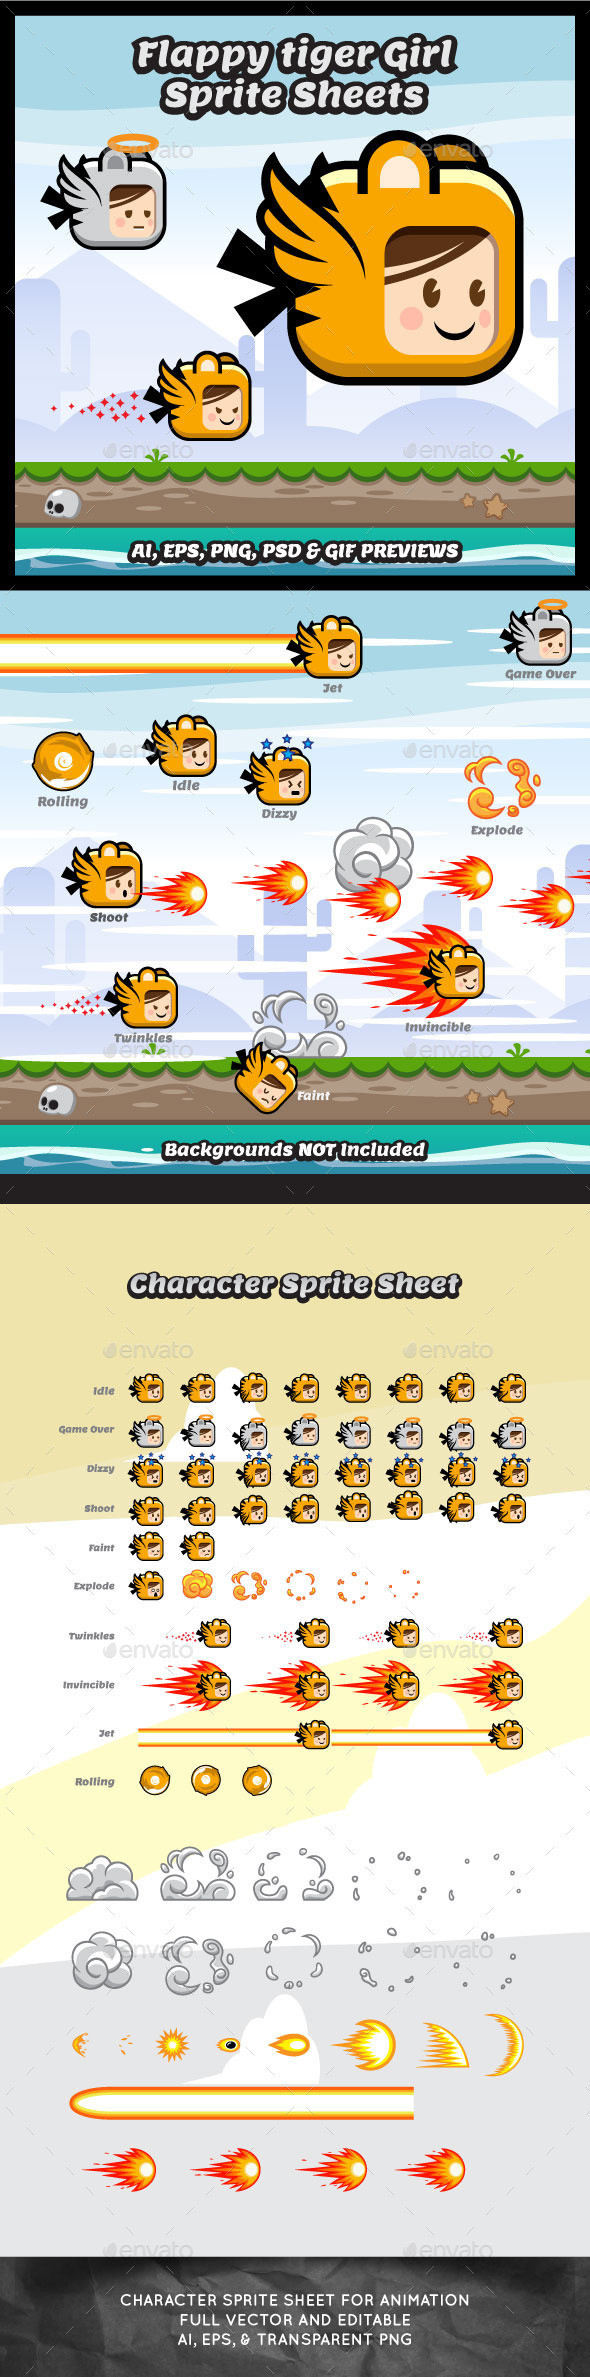 Flappy tiger girl game character sprite sheet sidescroller game asset flying flappy animation gui mobile games gameart game art 590